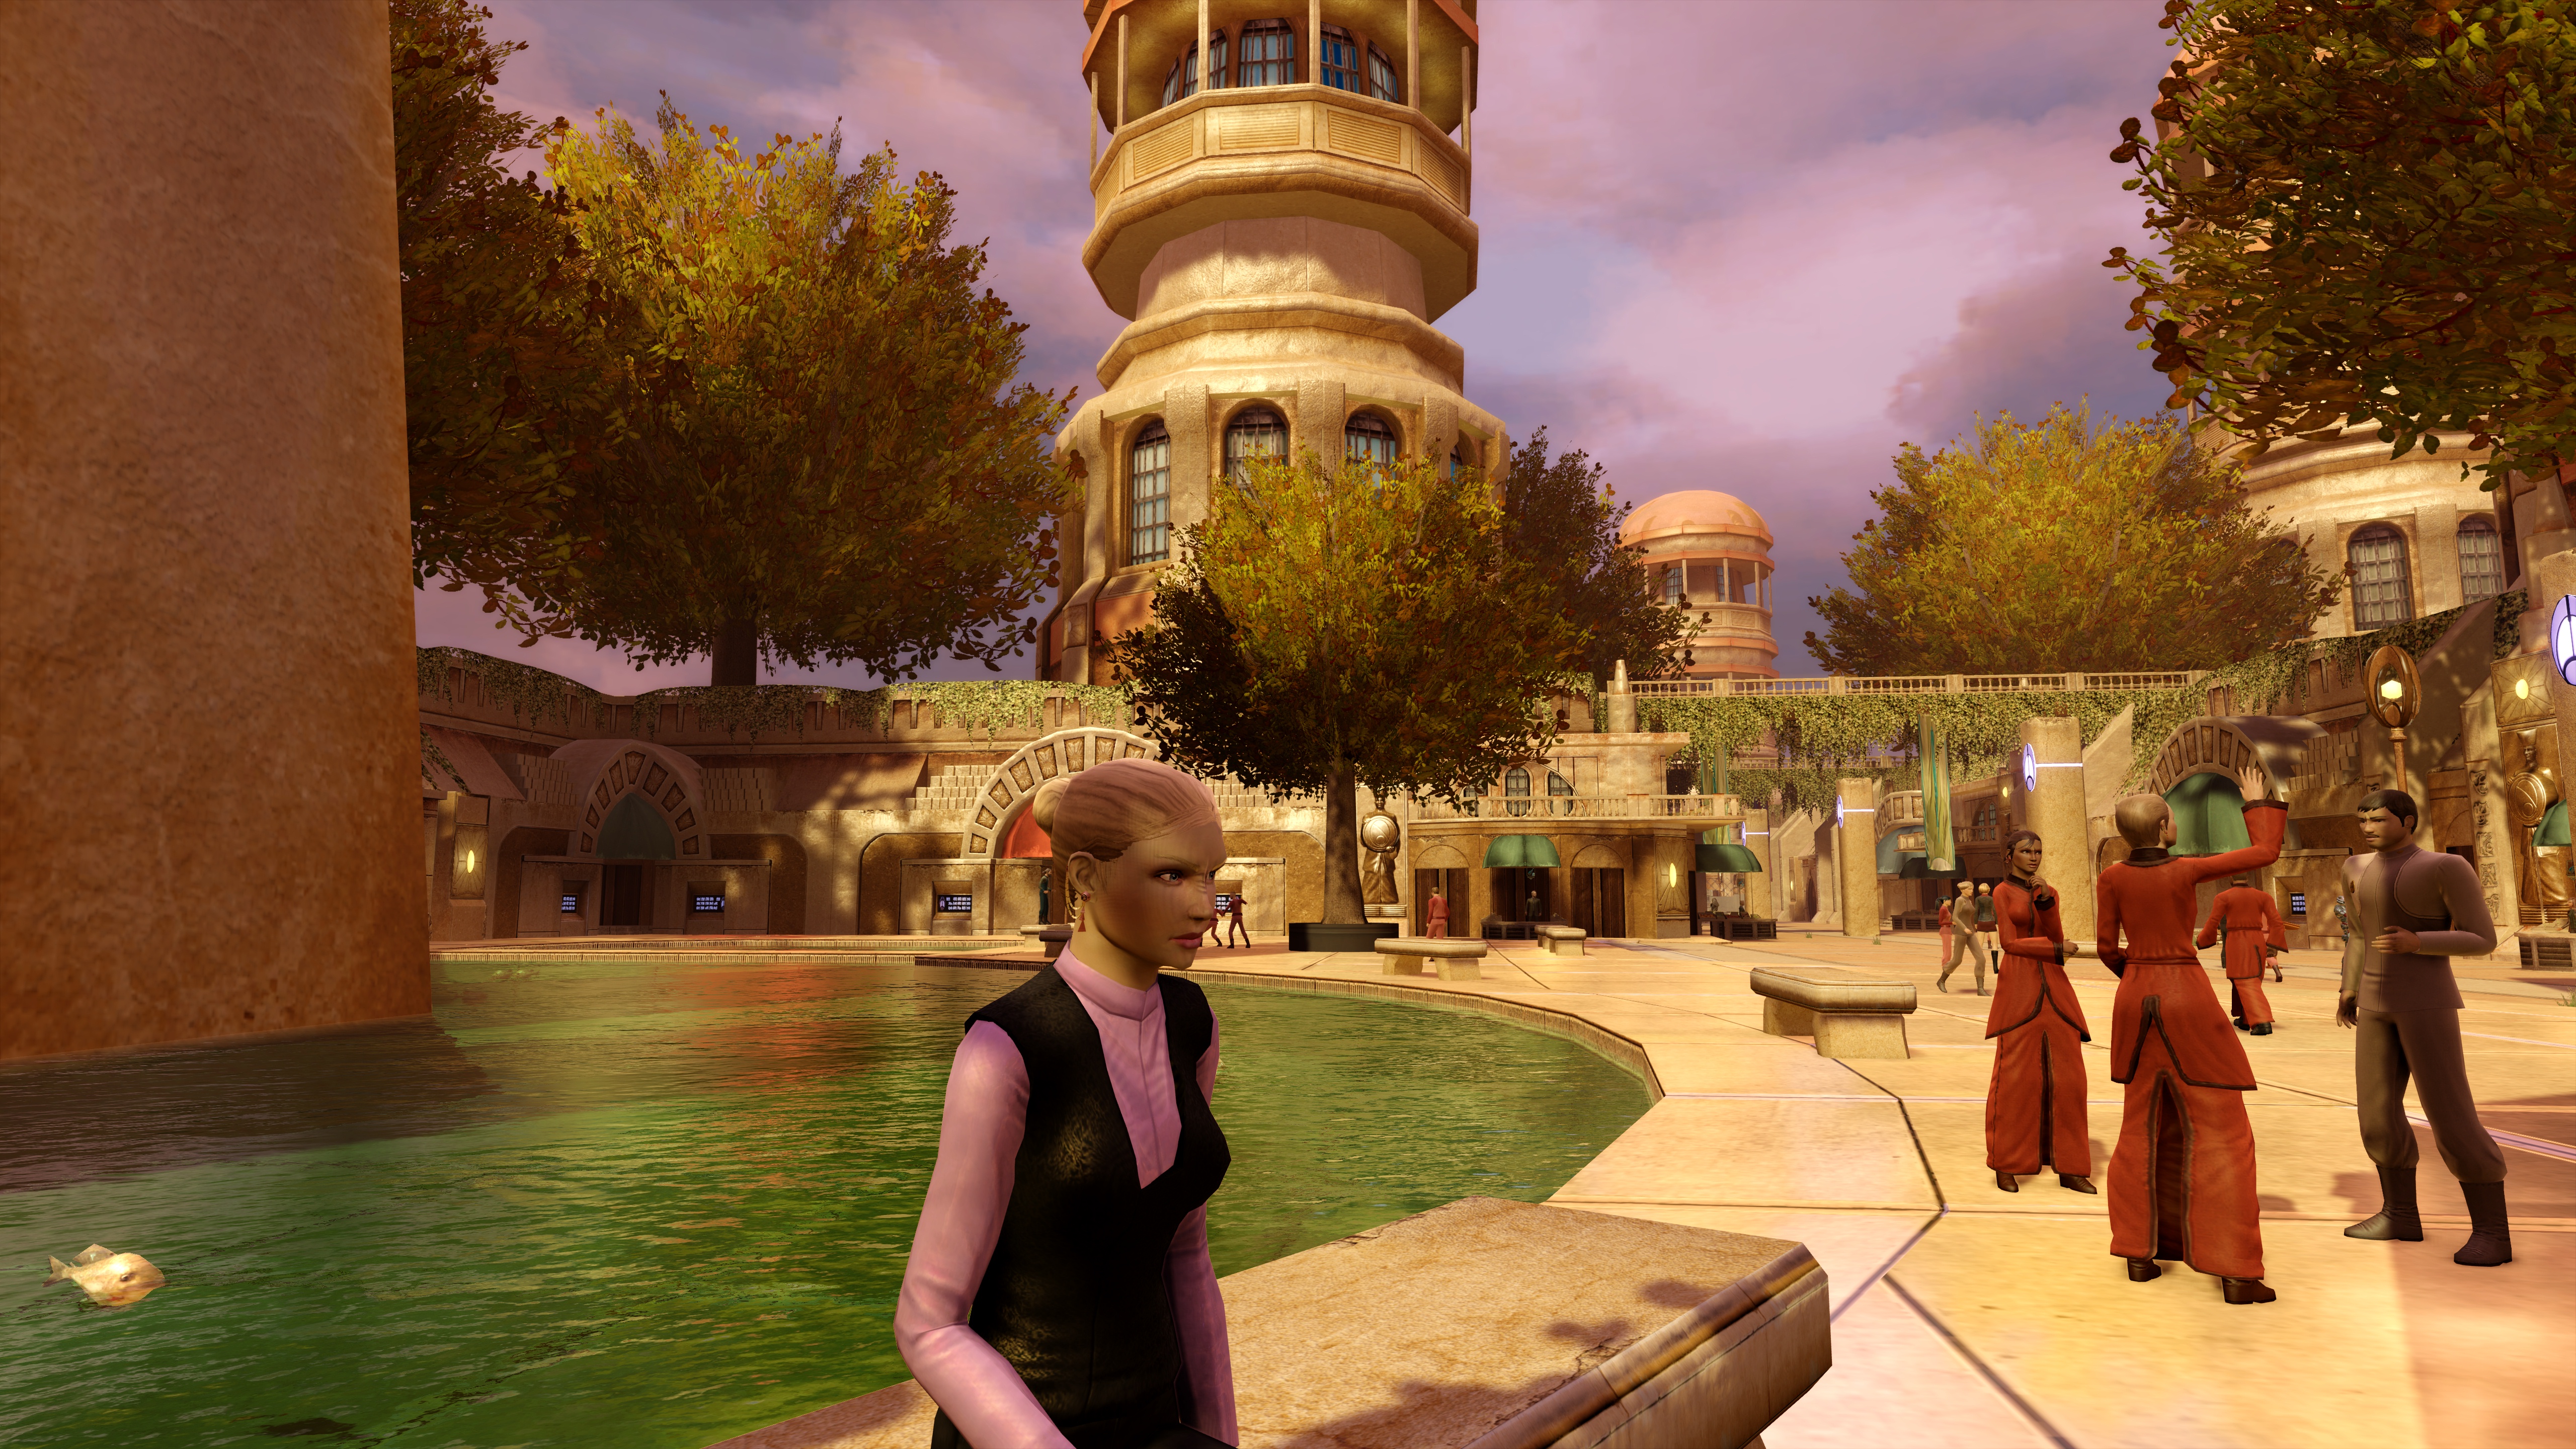 A pleasant afternoon on Bajor